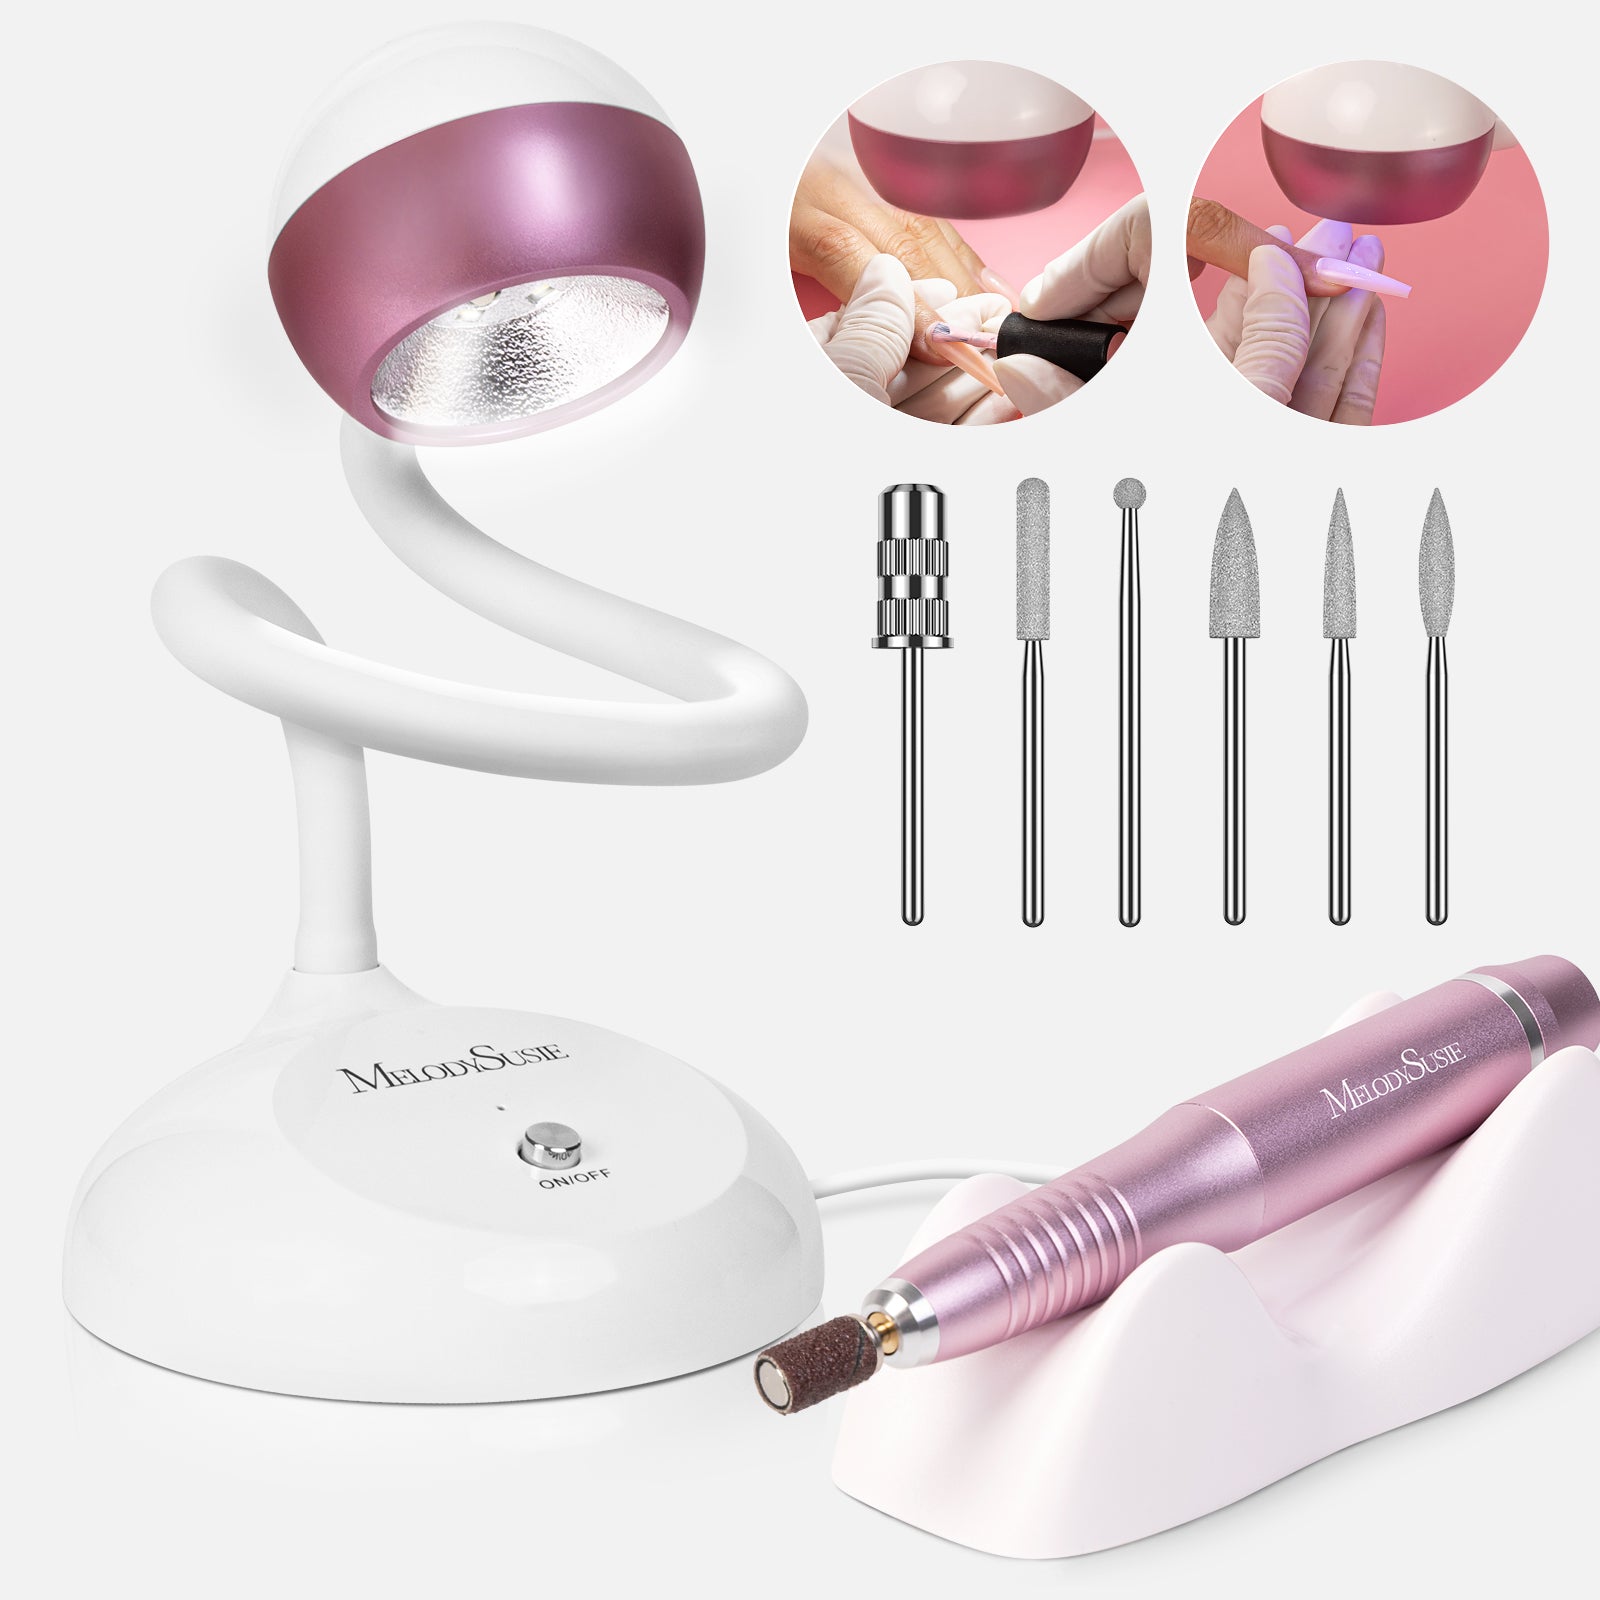 XC150D 3 in 1 Nail Drill with Nail Art Lamp